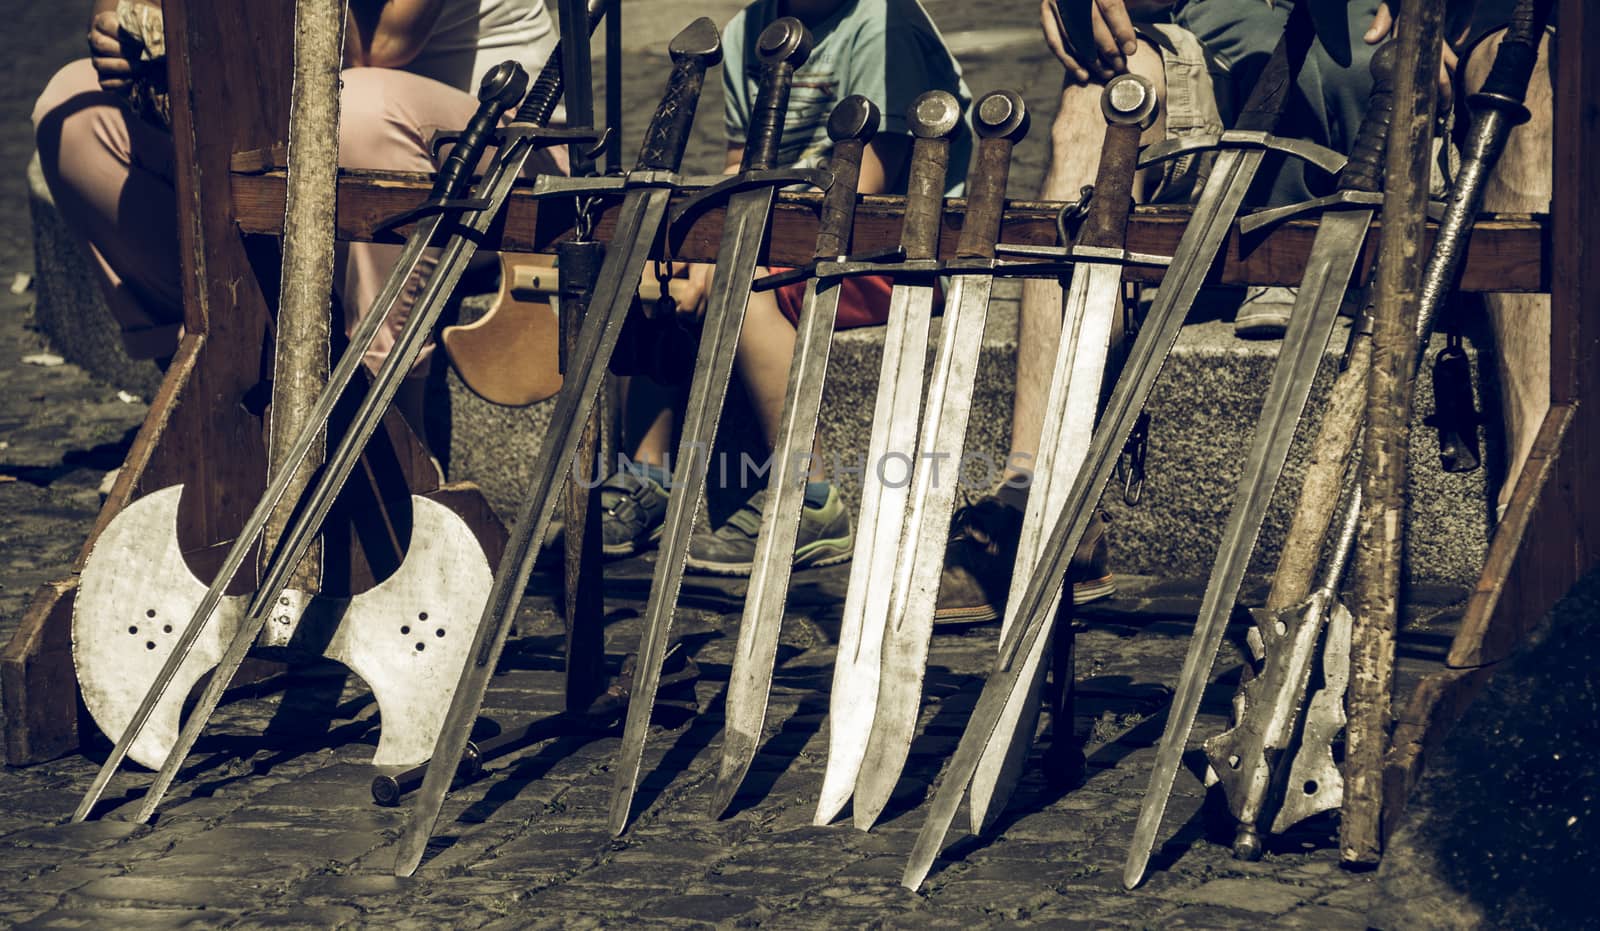 Swords set up in a row for the knight demonstration at a medieval market, Germany